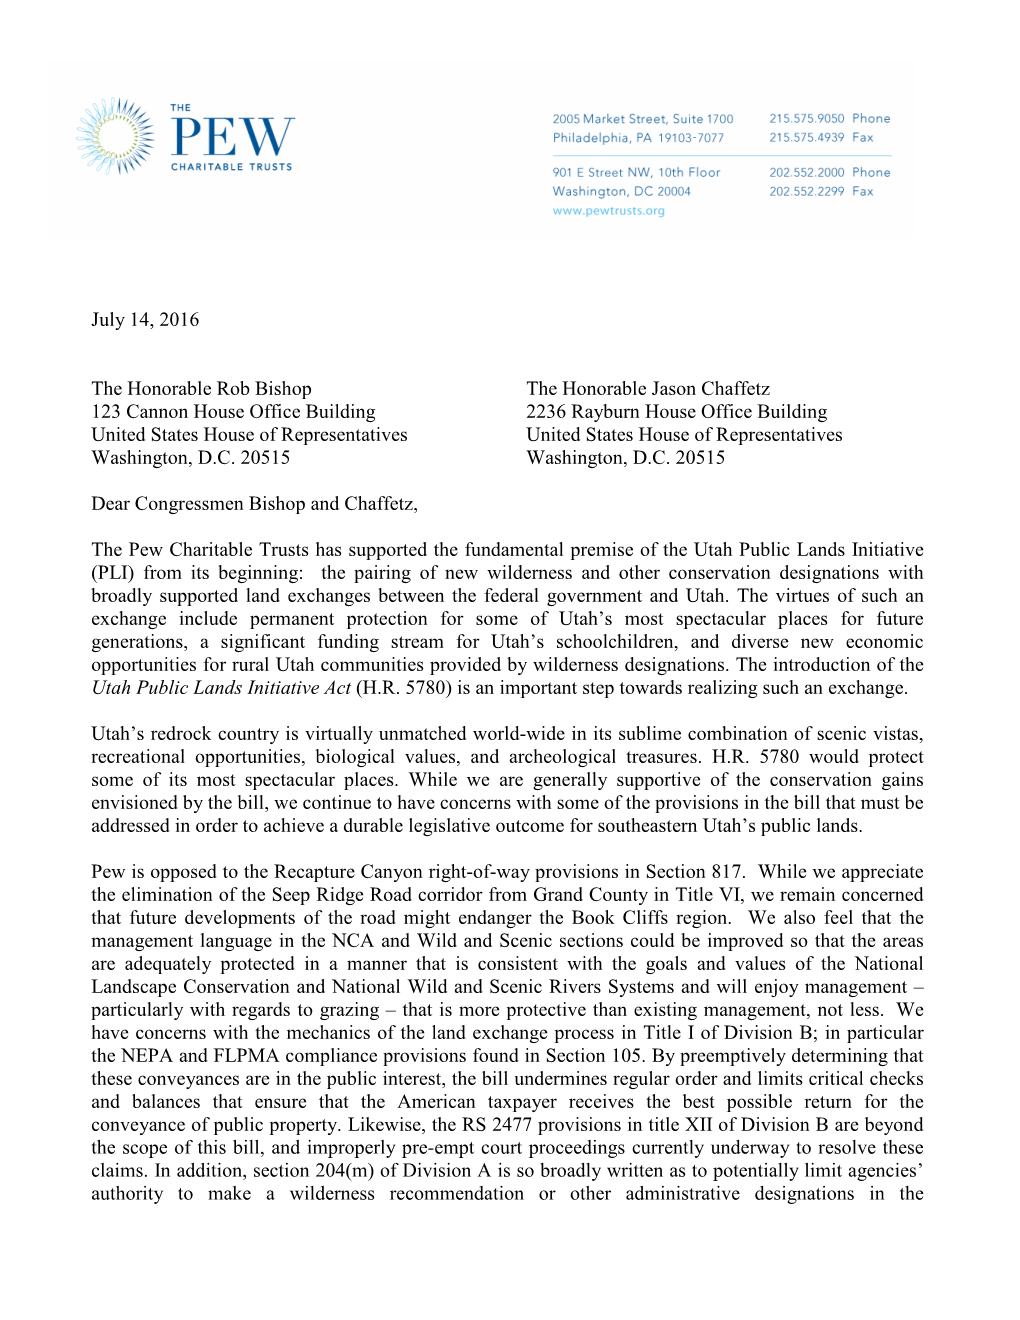 Letter to Reps. Bishop and Chaffetz Regarding the Utah Public Lands Initiative